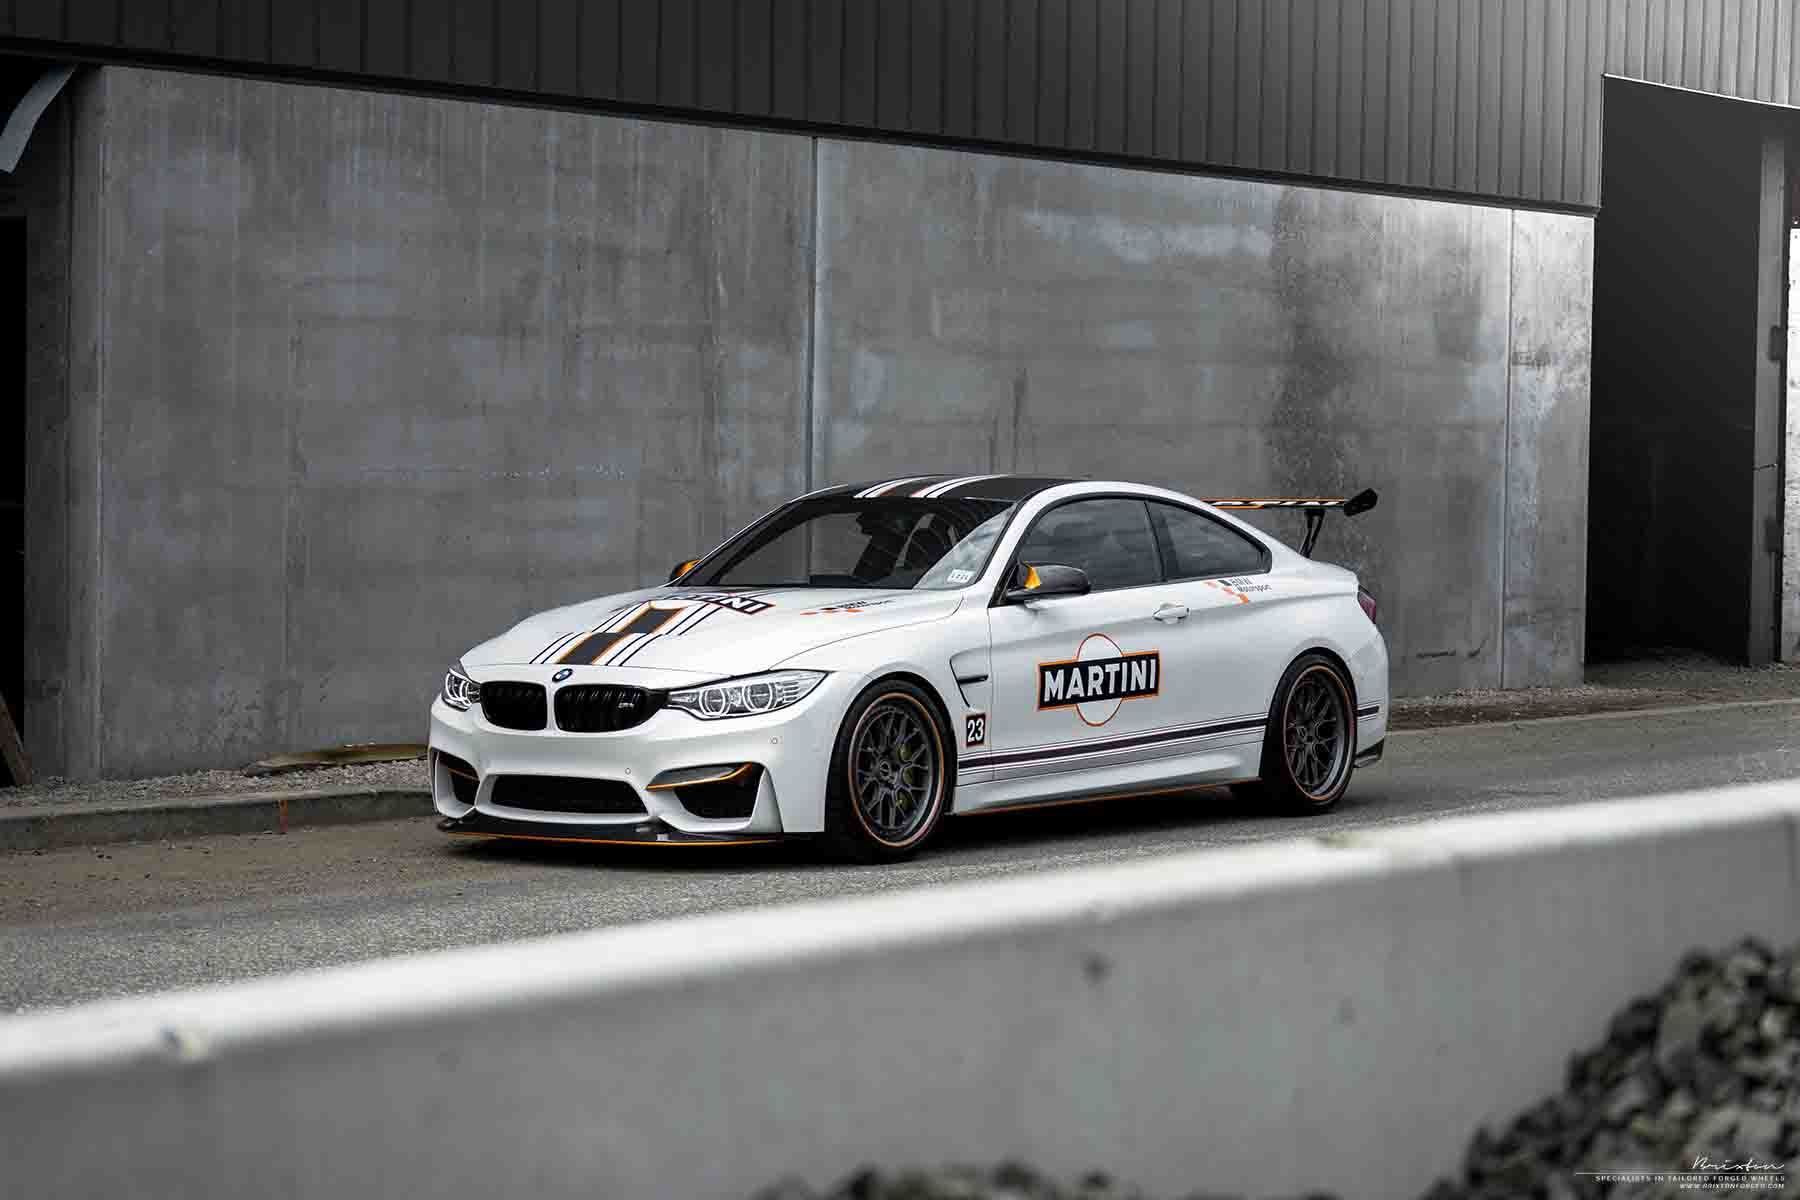 images-products-1-2687-232974975-white-bmw-m4-gts-martini-brixton-forged-cm16-wheels-cm16-circuit-series-kingsport-grey-concave-o.jpg